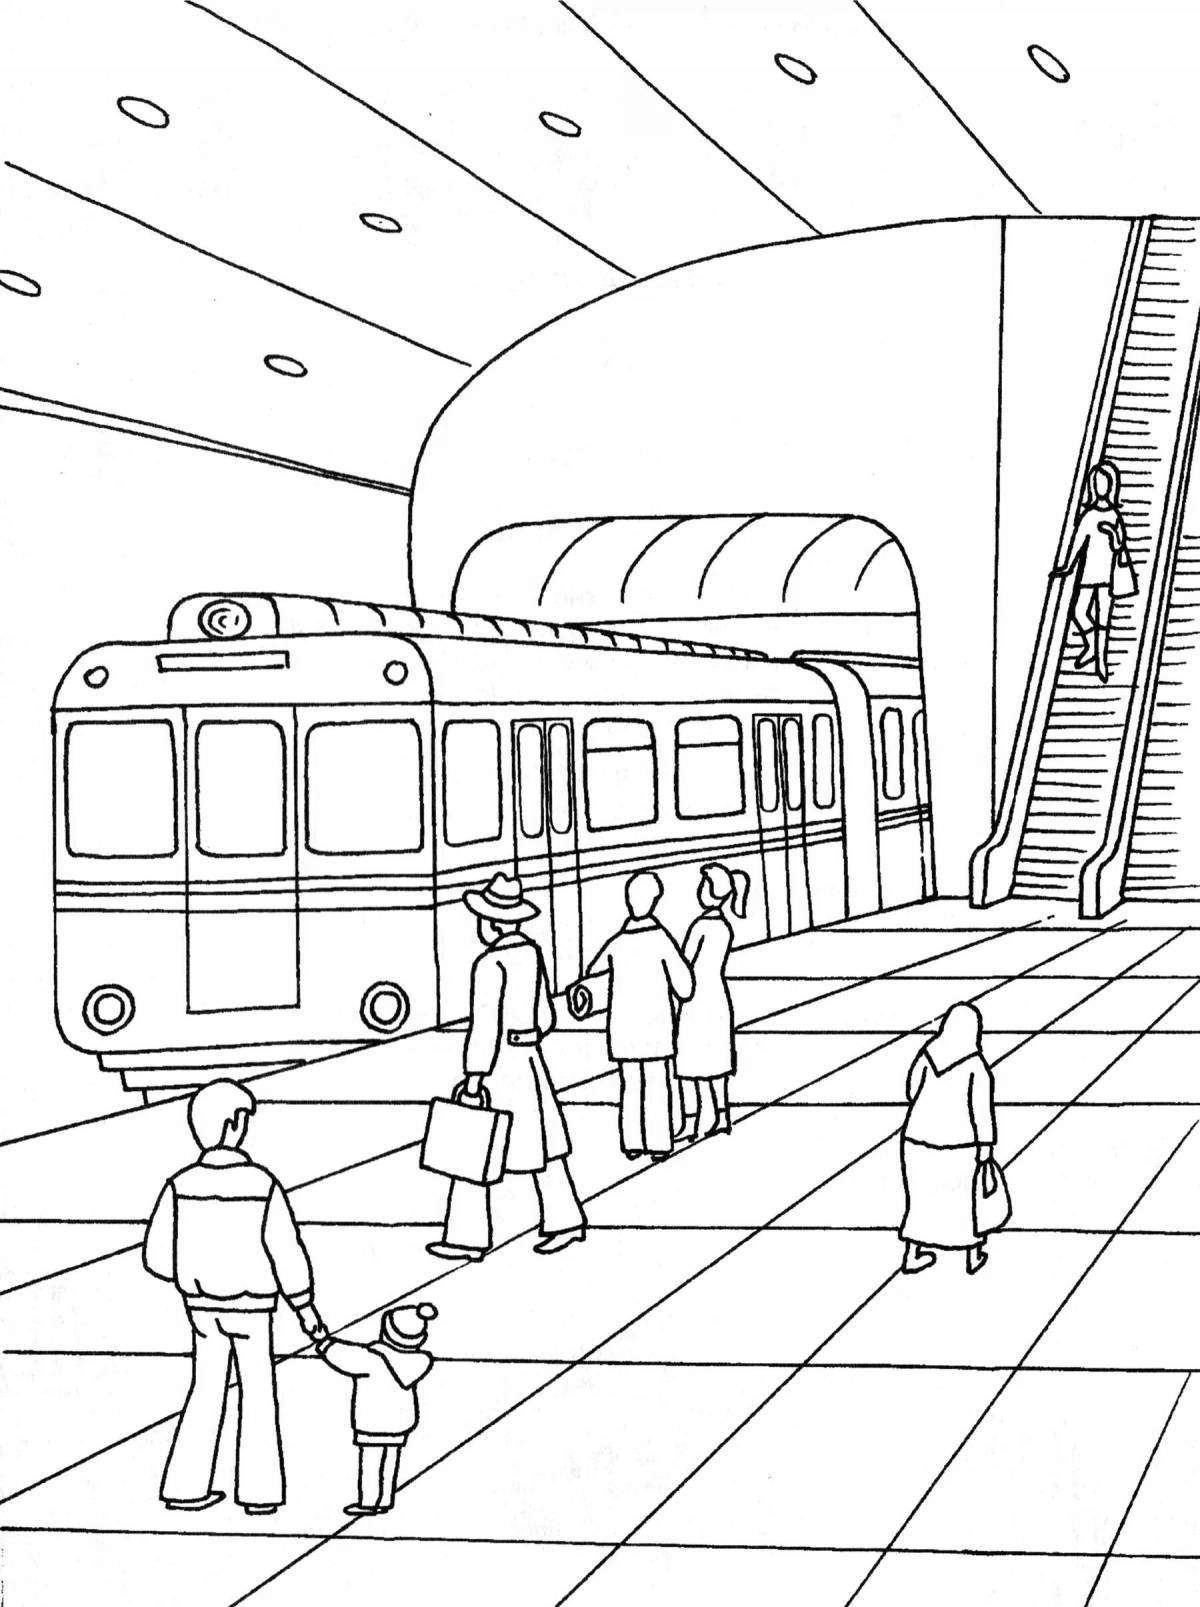 Intricate coloring of the Moscow metro